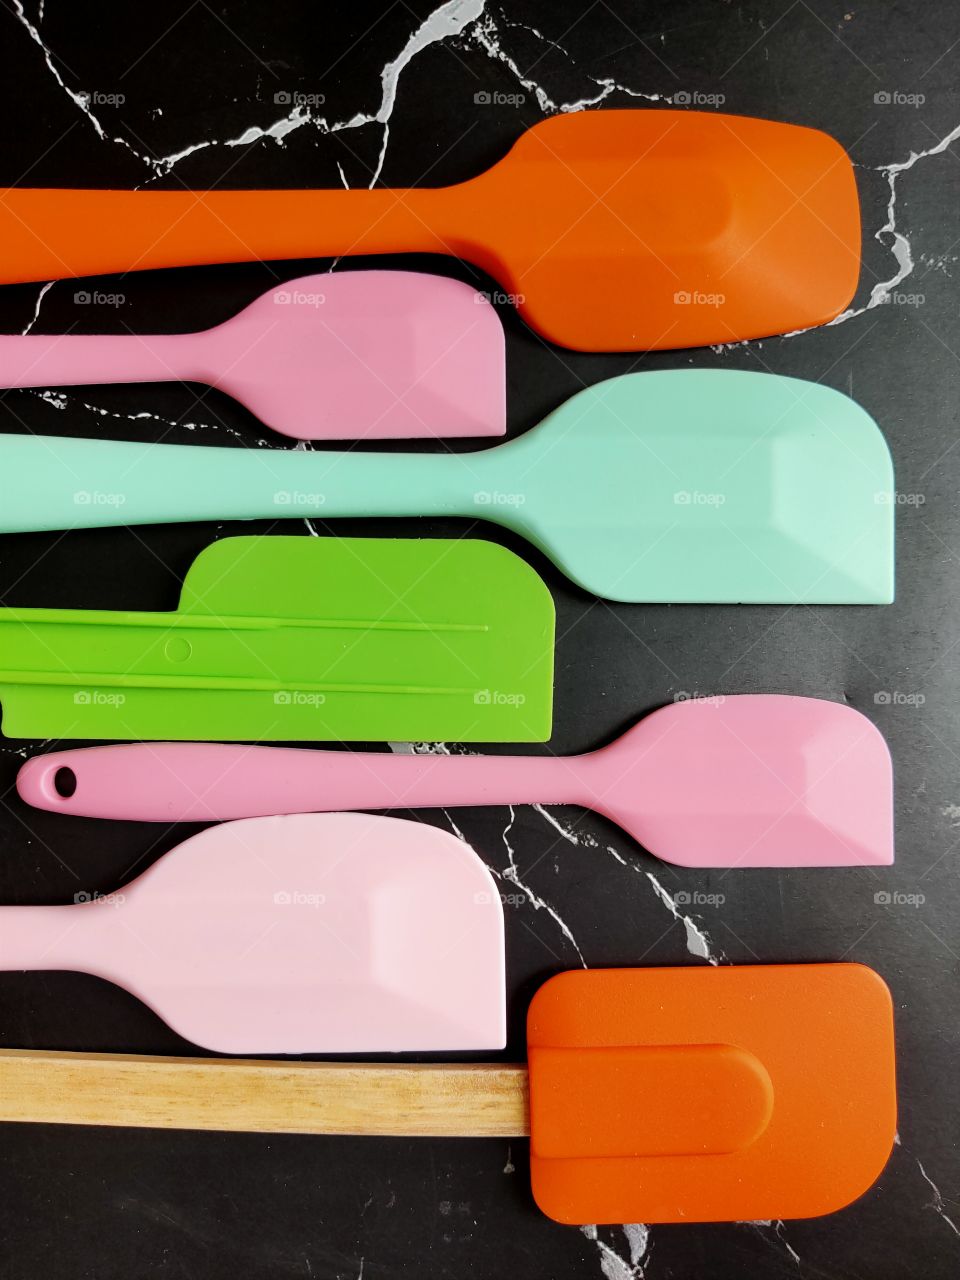 Multi-colored silicone spatula in various sizes for bakery work.